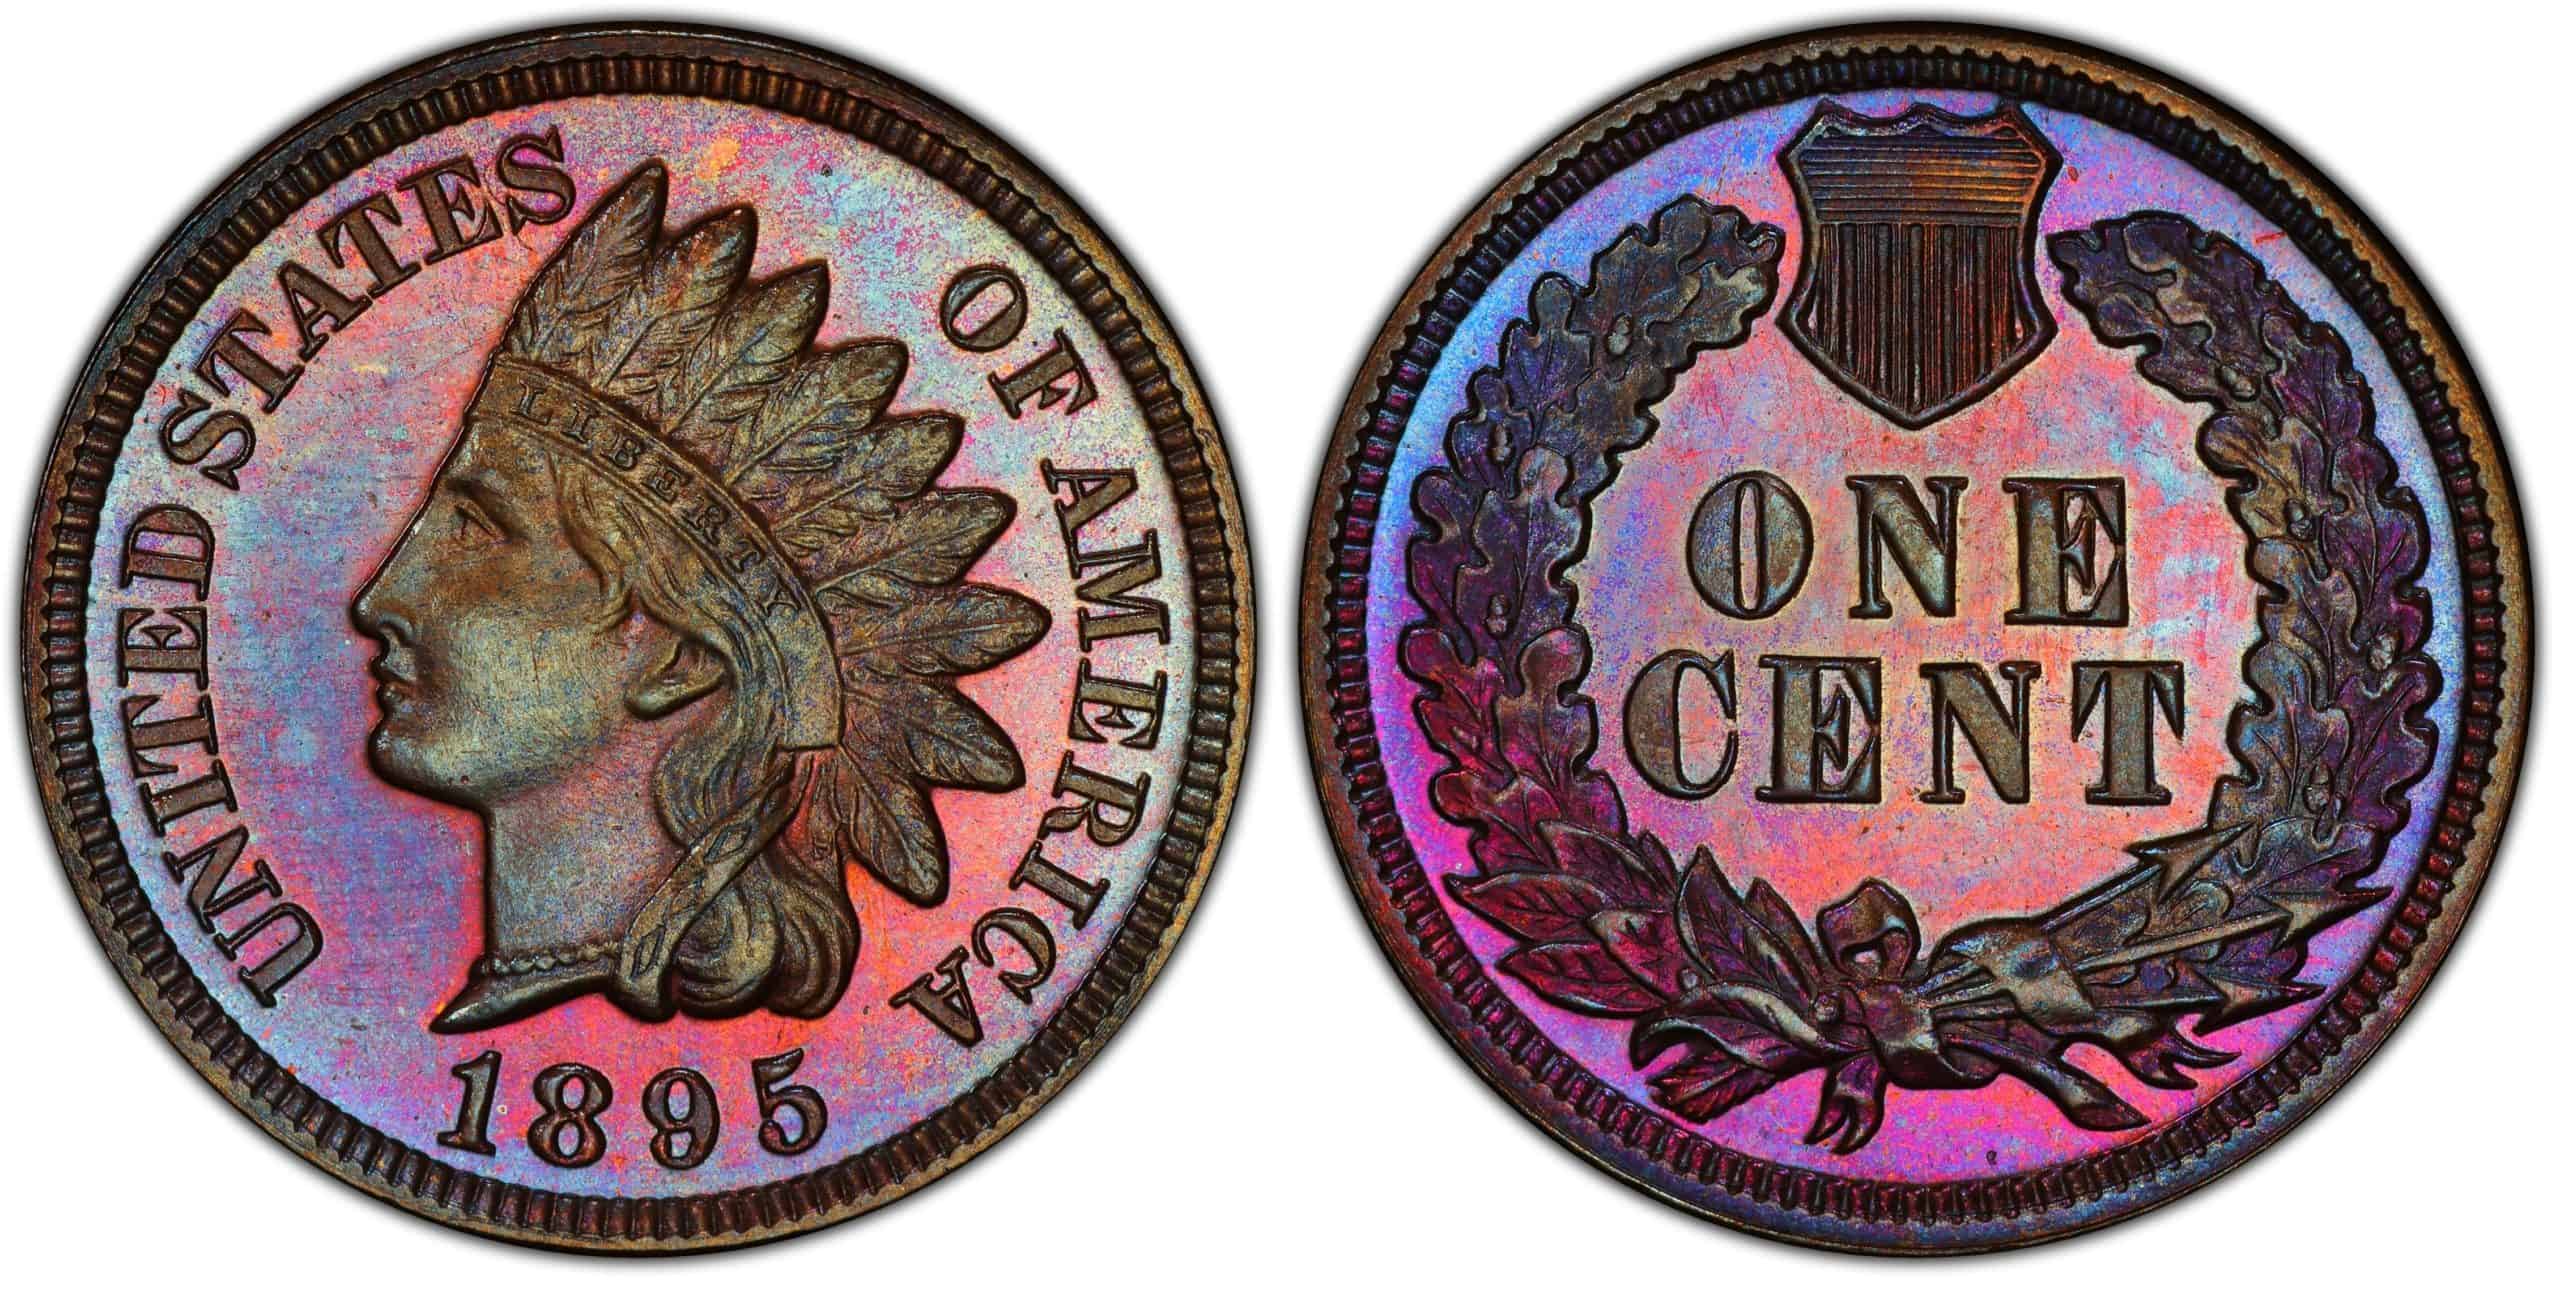 1895 proof Indian head penny